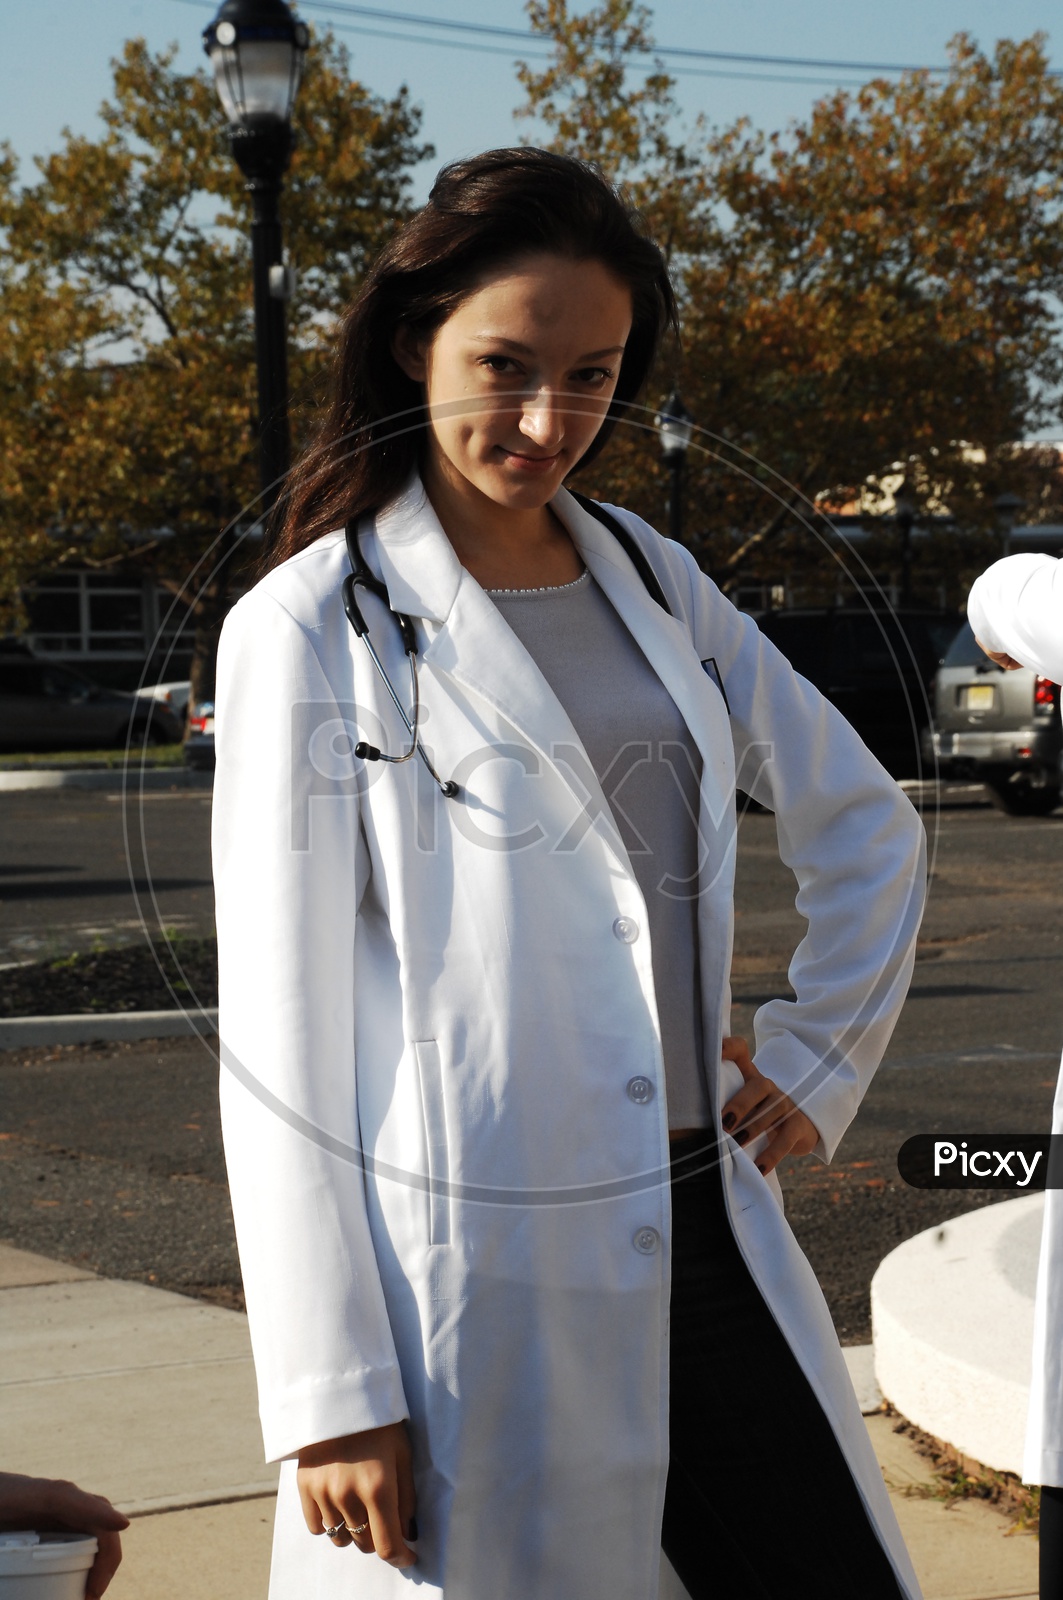 A female doctor with stethoscope wearing a long white coat